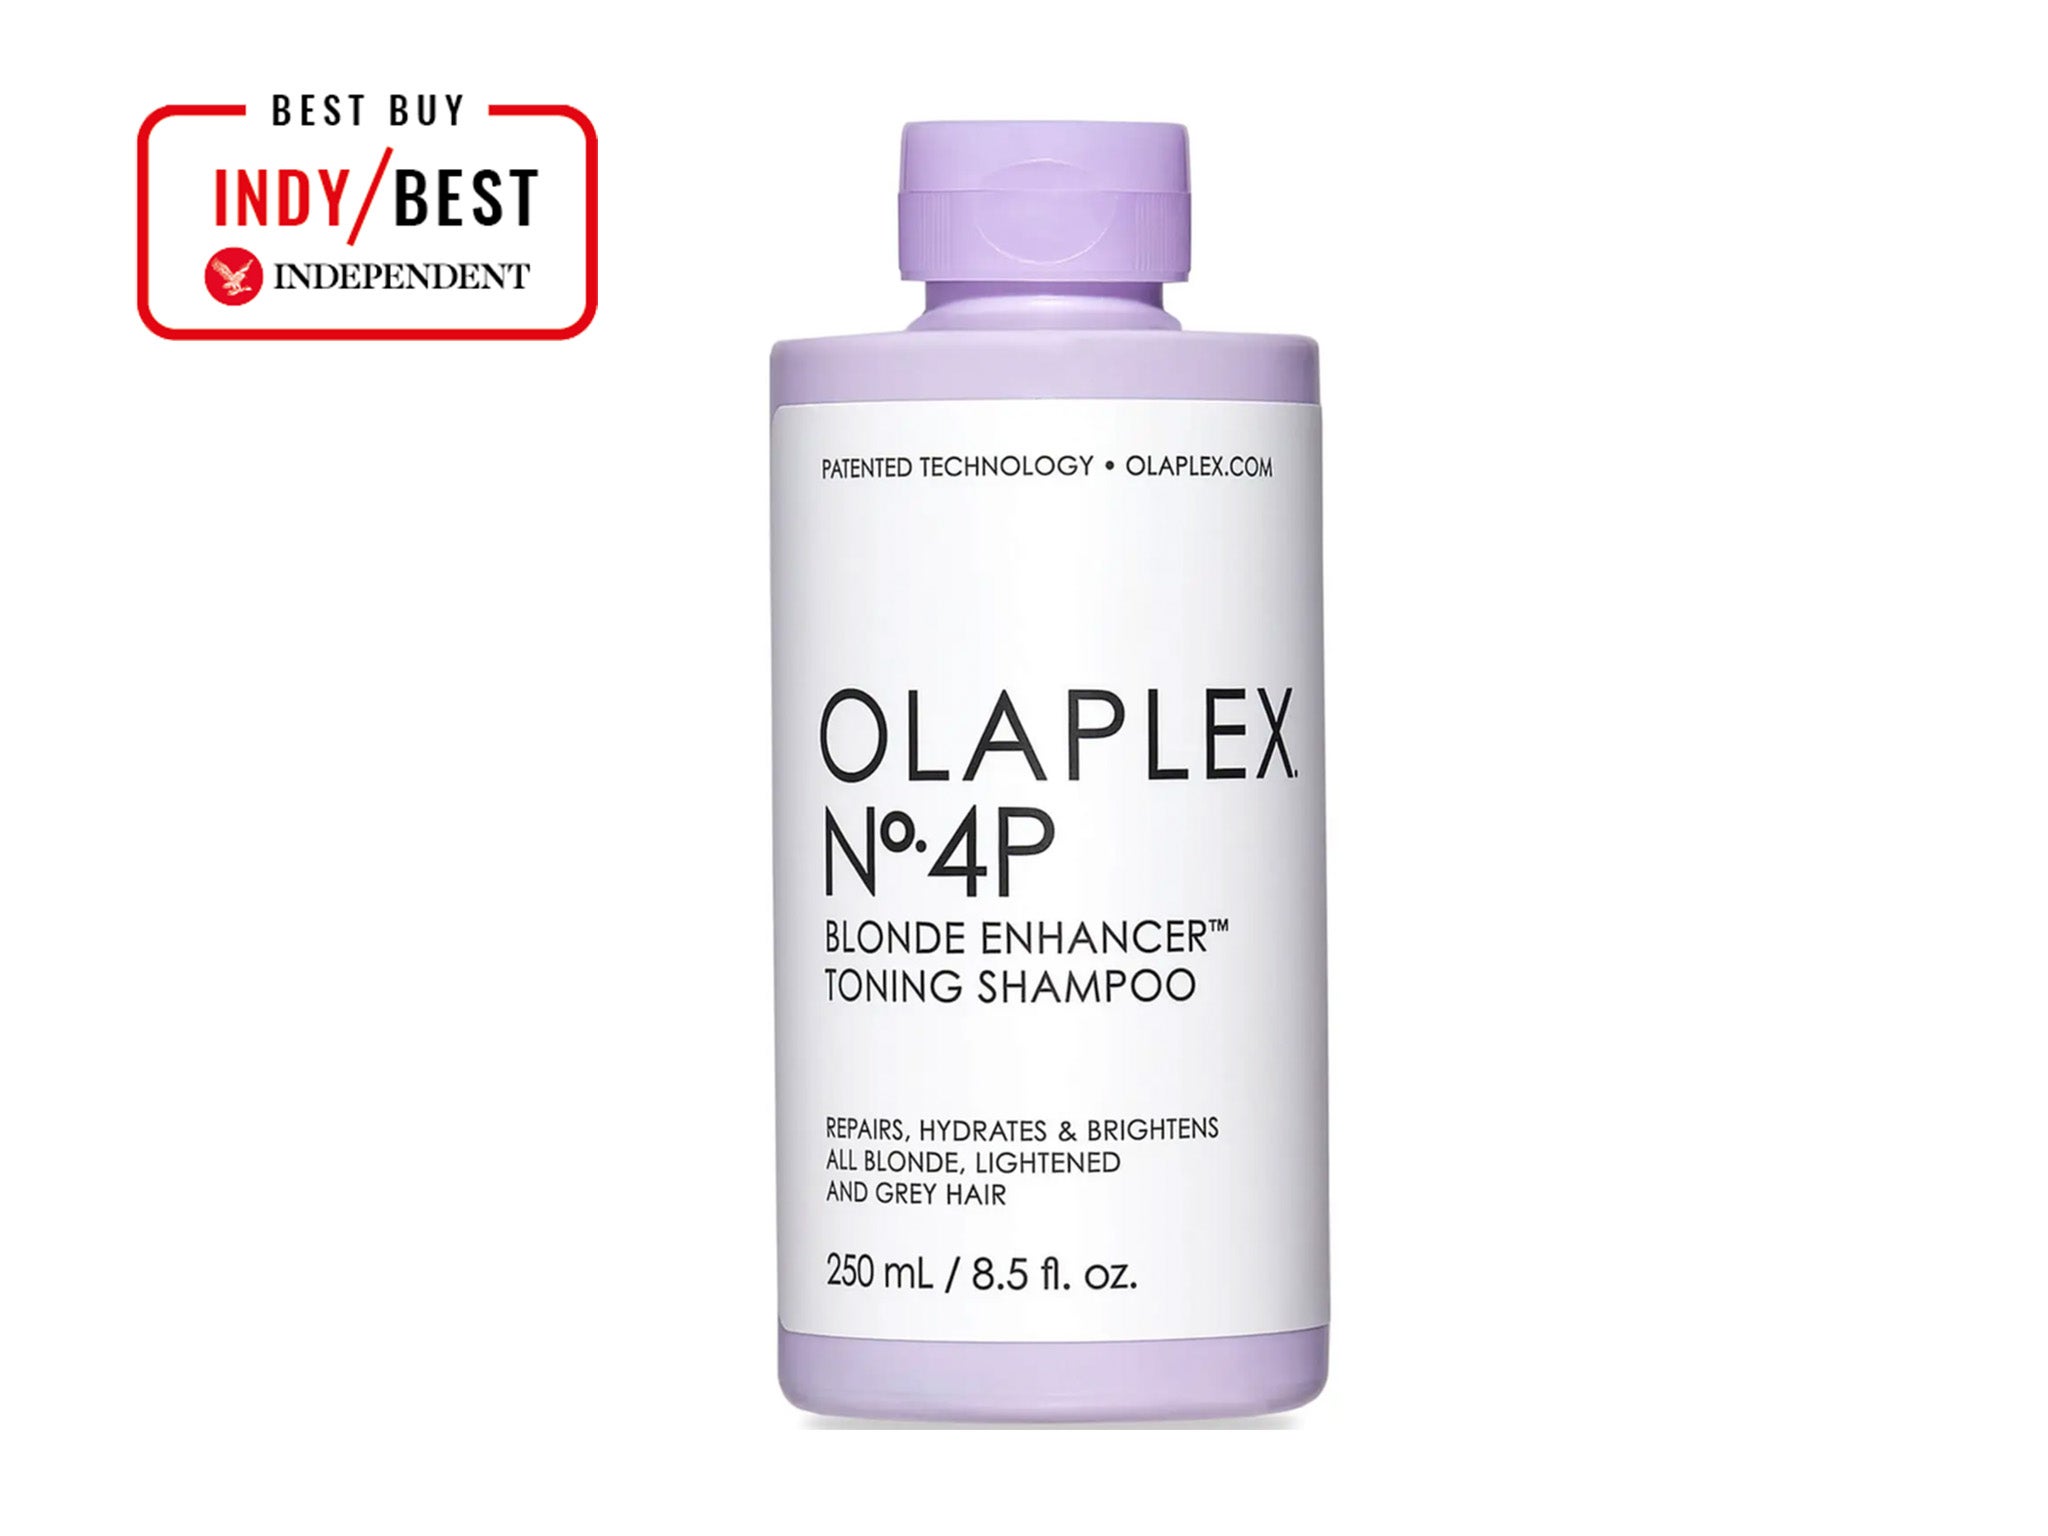 indybest, cyber monday, amazon, black friday, olaplex products reduced to all-time low in lookfantastic’s cyber monday sale